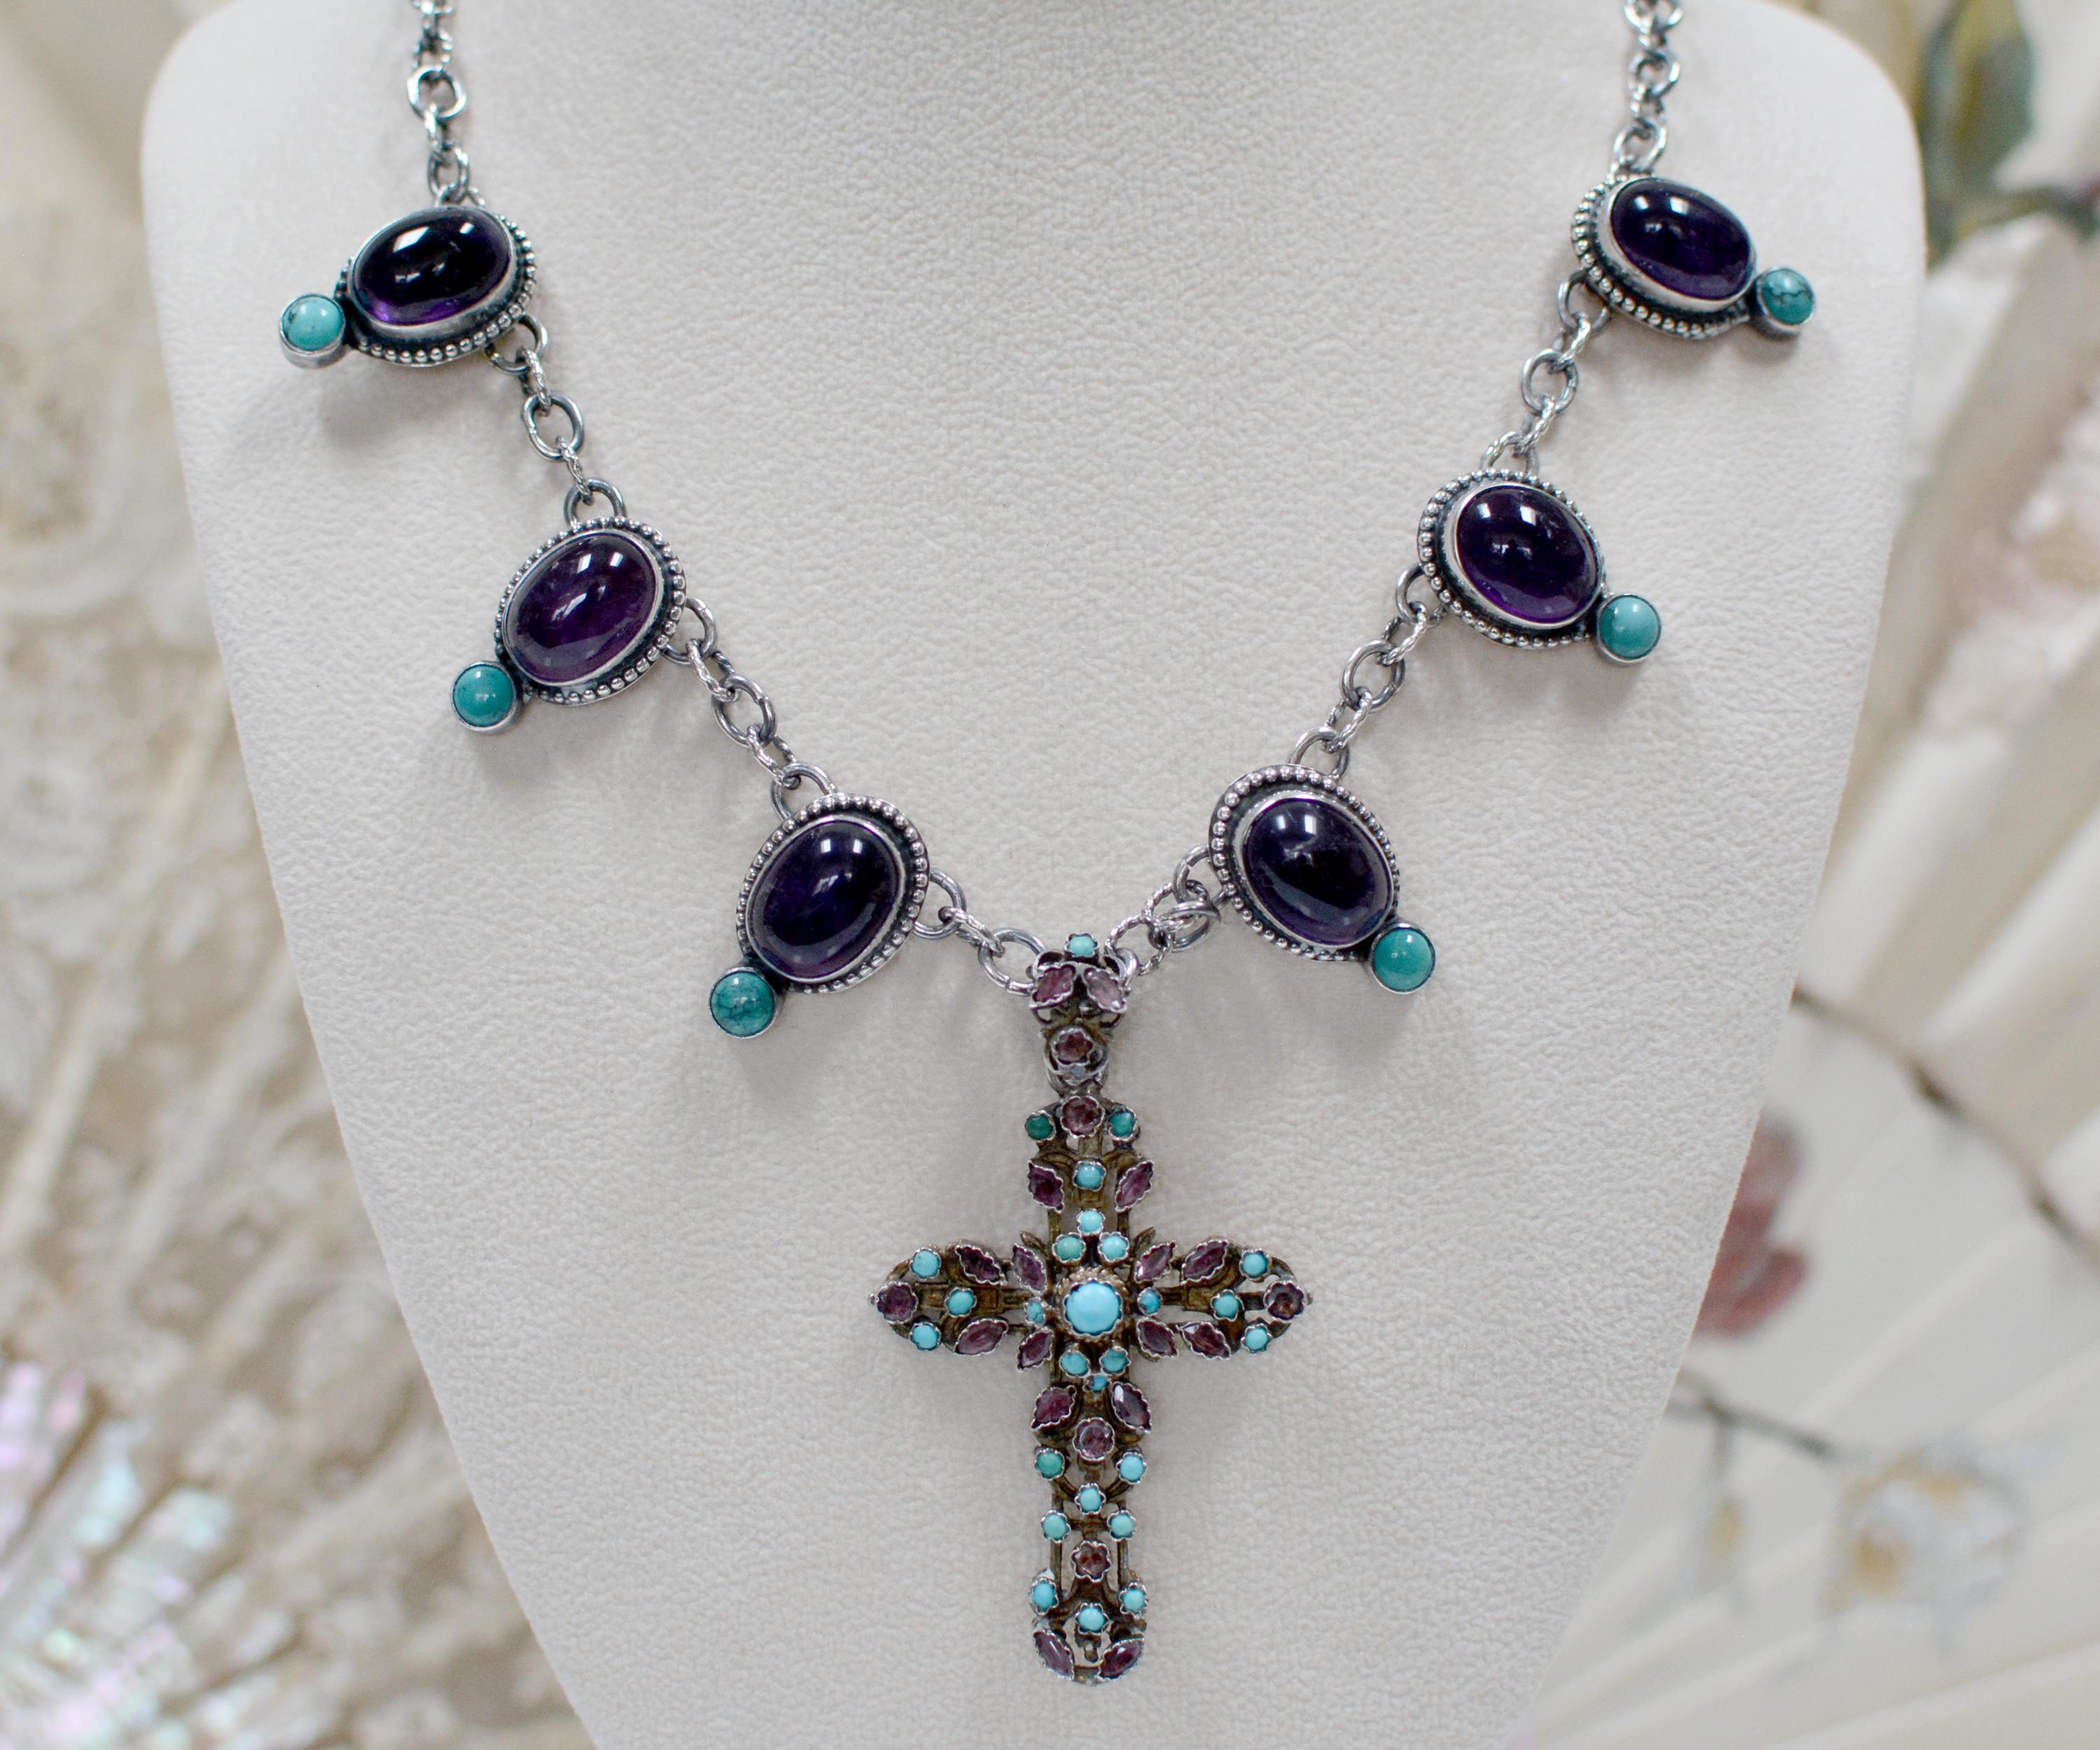 At the center of this refined Bohemian necklace is an iconic mid 1800's Austro Hungarian amethyst and turquoise Bishop's cross measuring 2.88